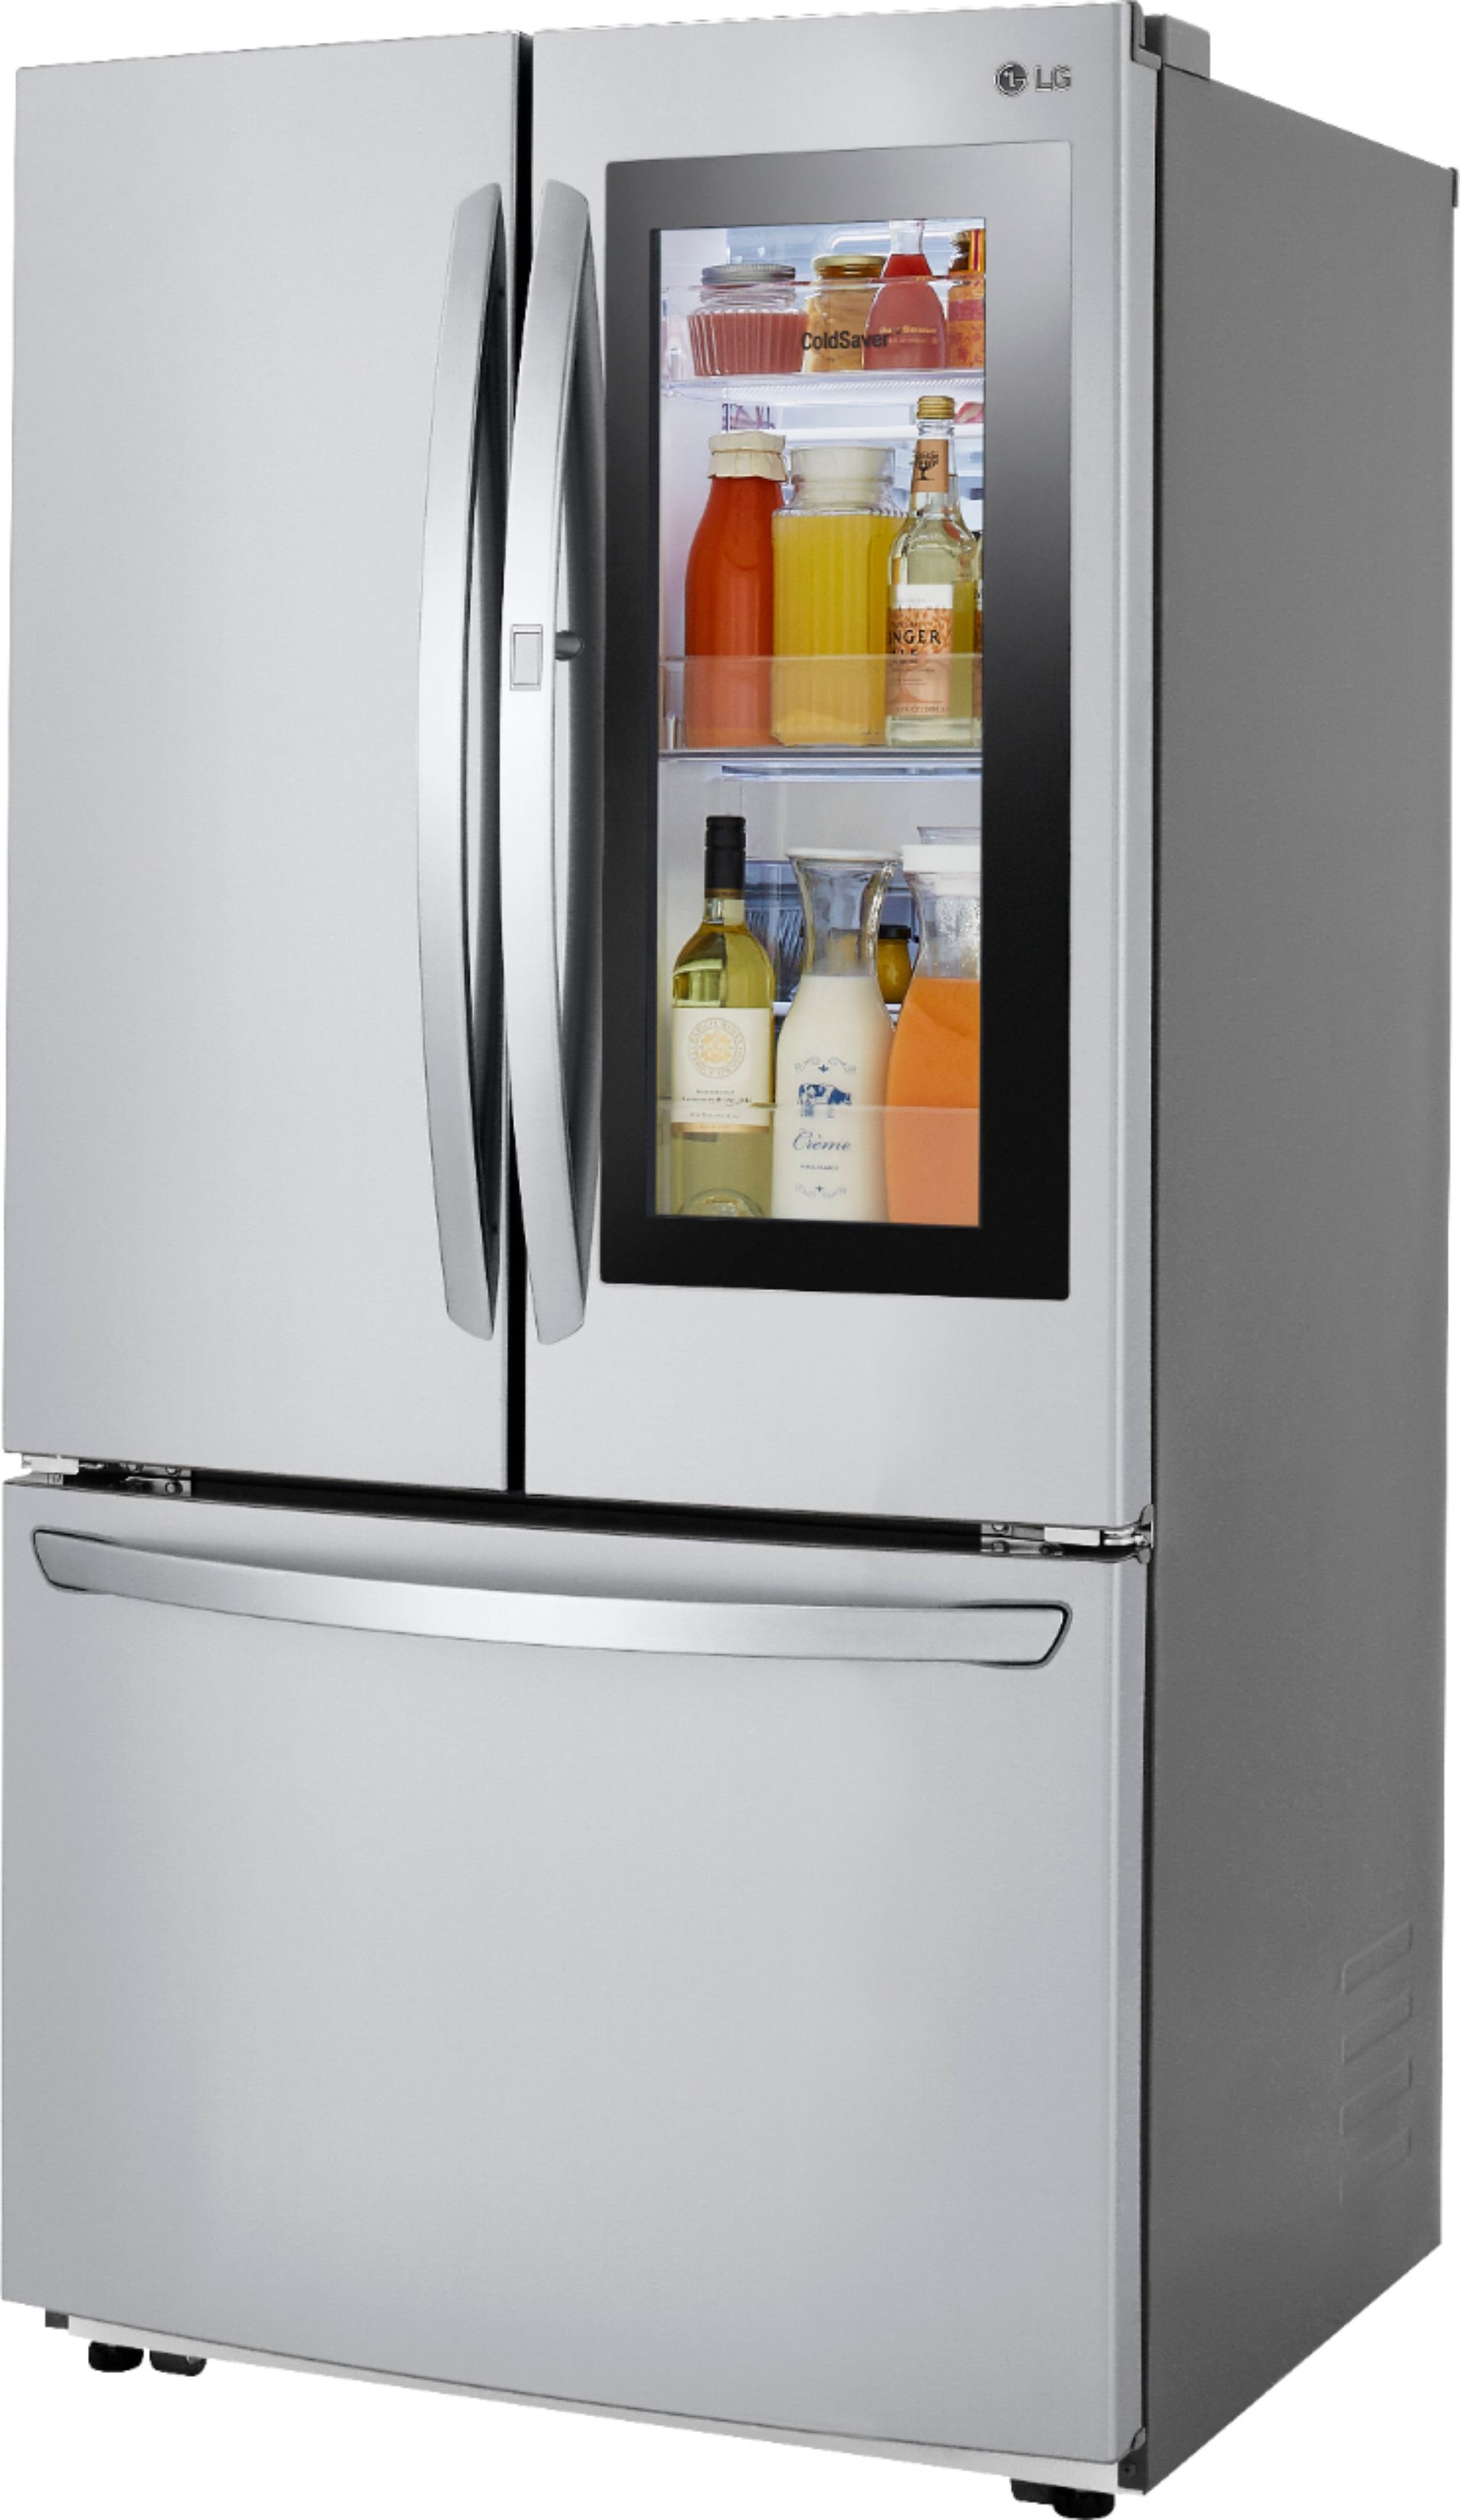 Questions and Answers: LG 27 Cu. Ft. InstaView French Door-in-Door ...